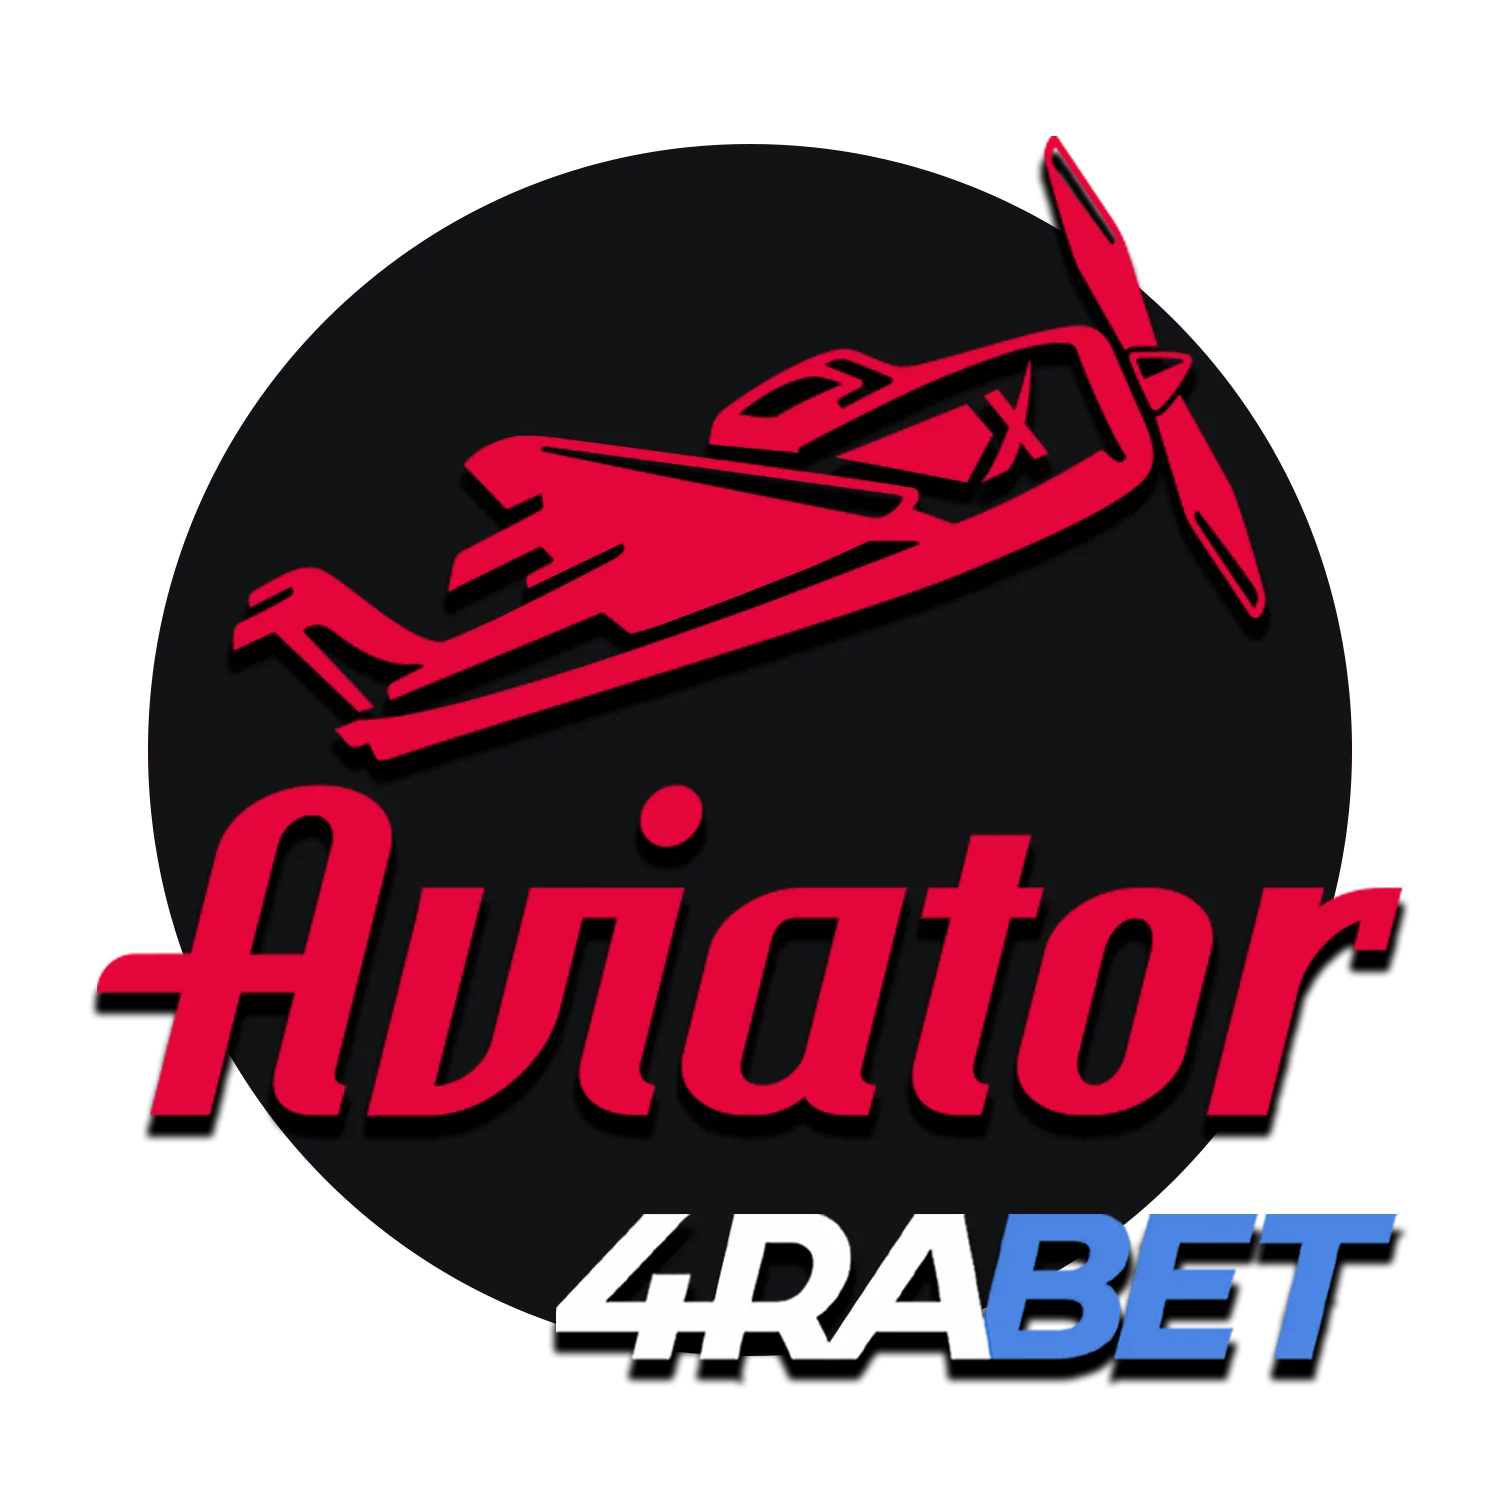 Learn how to play the Aviator slot on the 4rabet site.